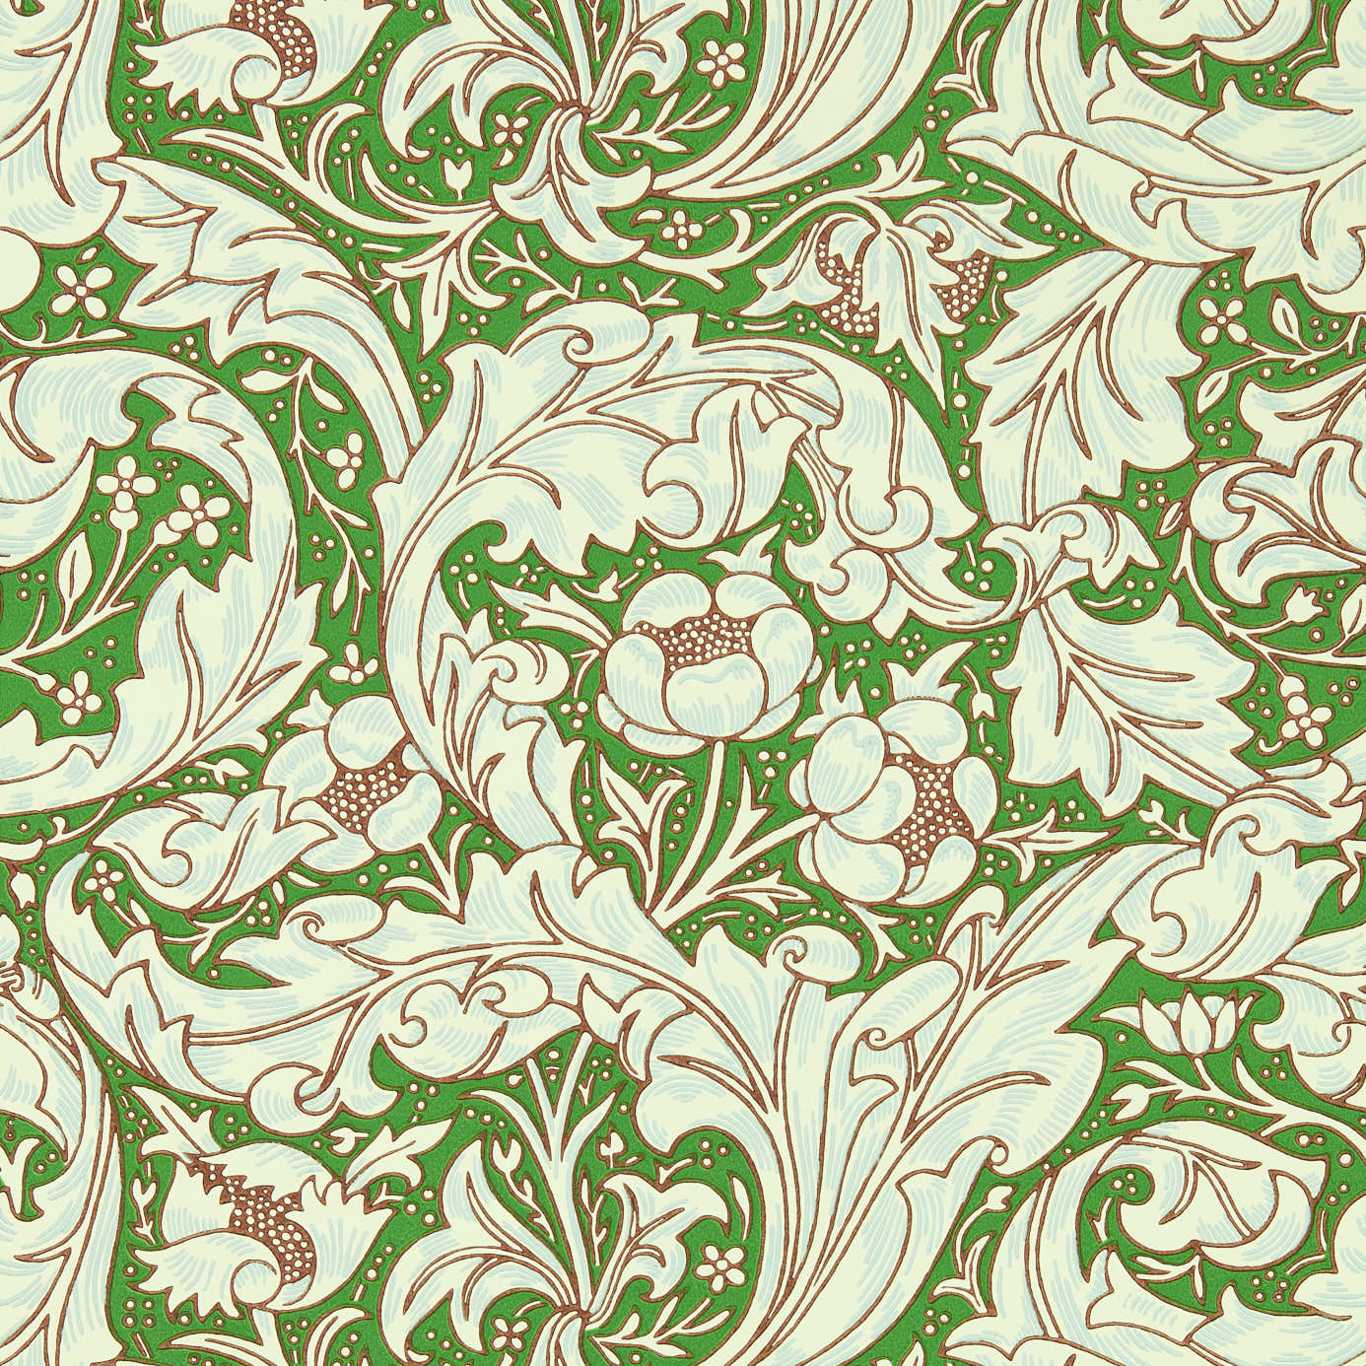 Bachelors Button Leaf Green/Sky Wallpaper MCOW217096 by Morris & Co